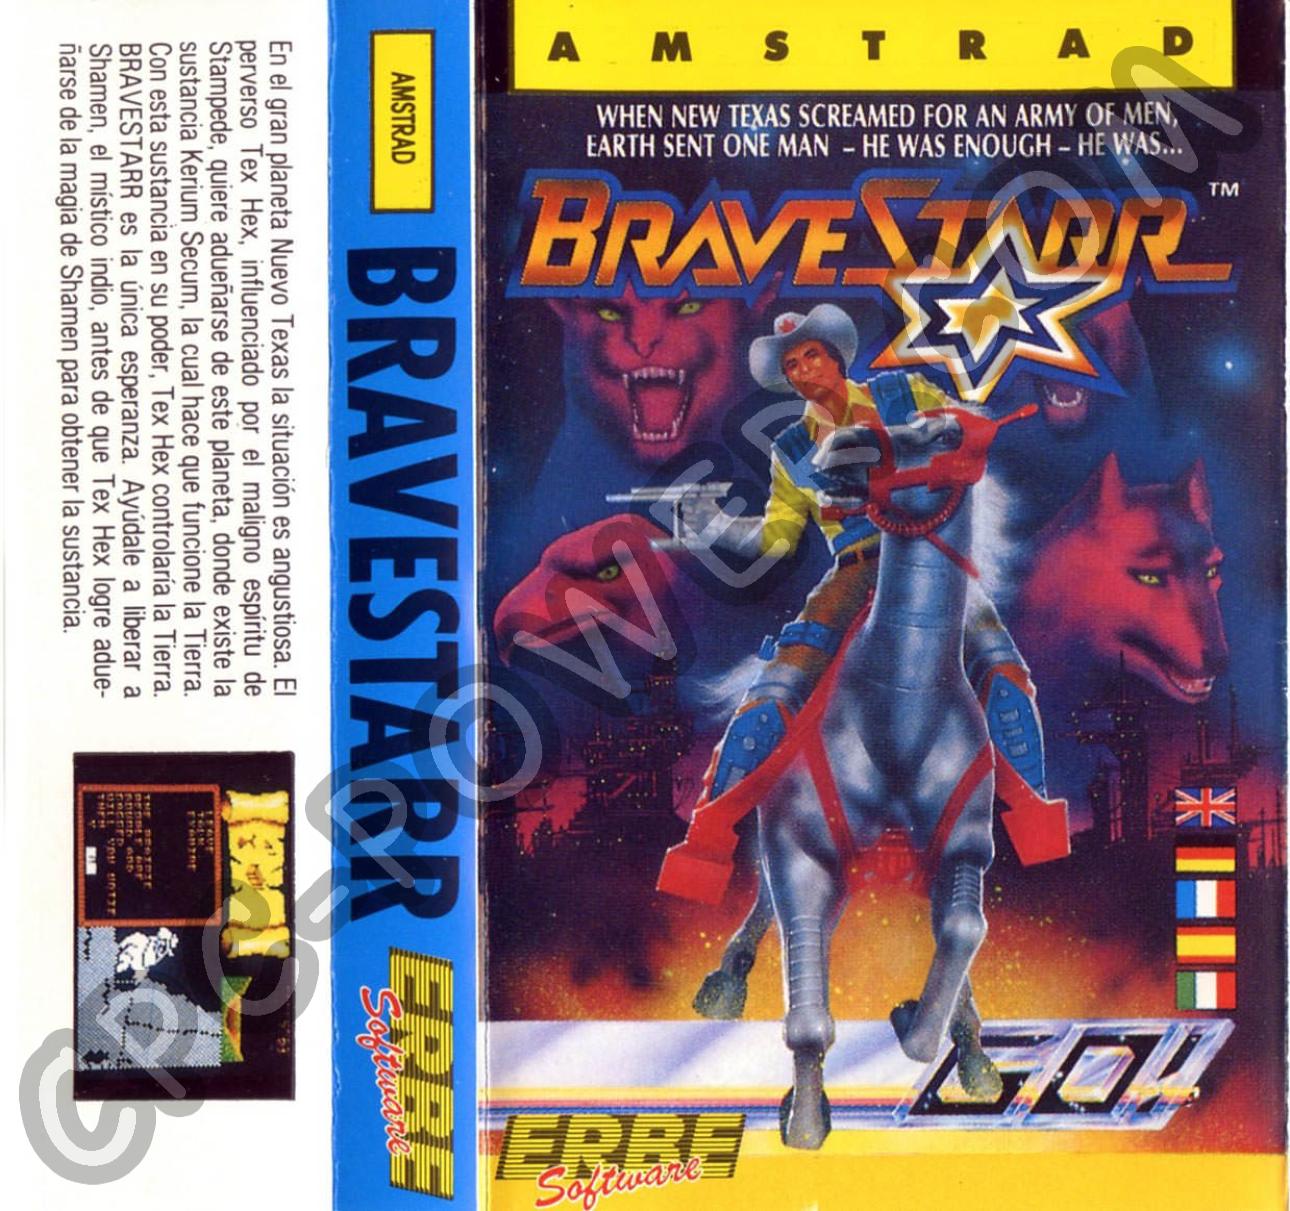 Bravestarr (Test CPC) Extra_lire_fichier.php?extra=package&fiche=126&slot=6&part=A&type=